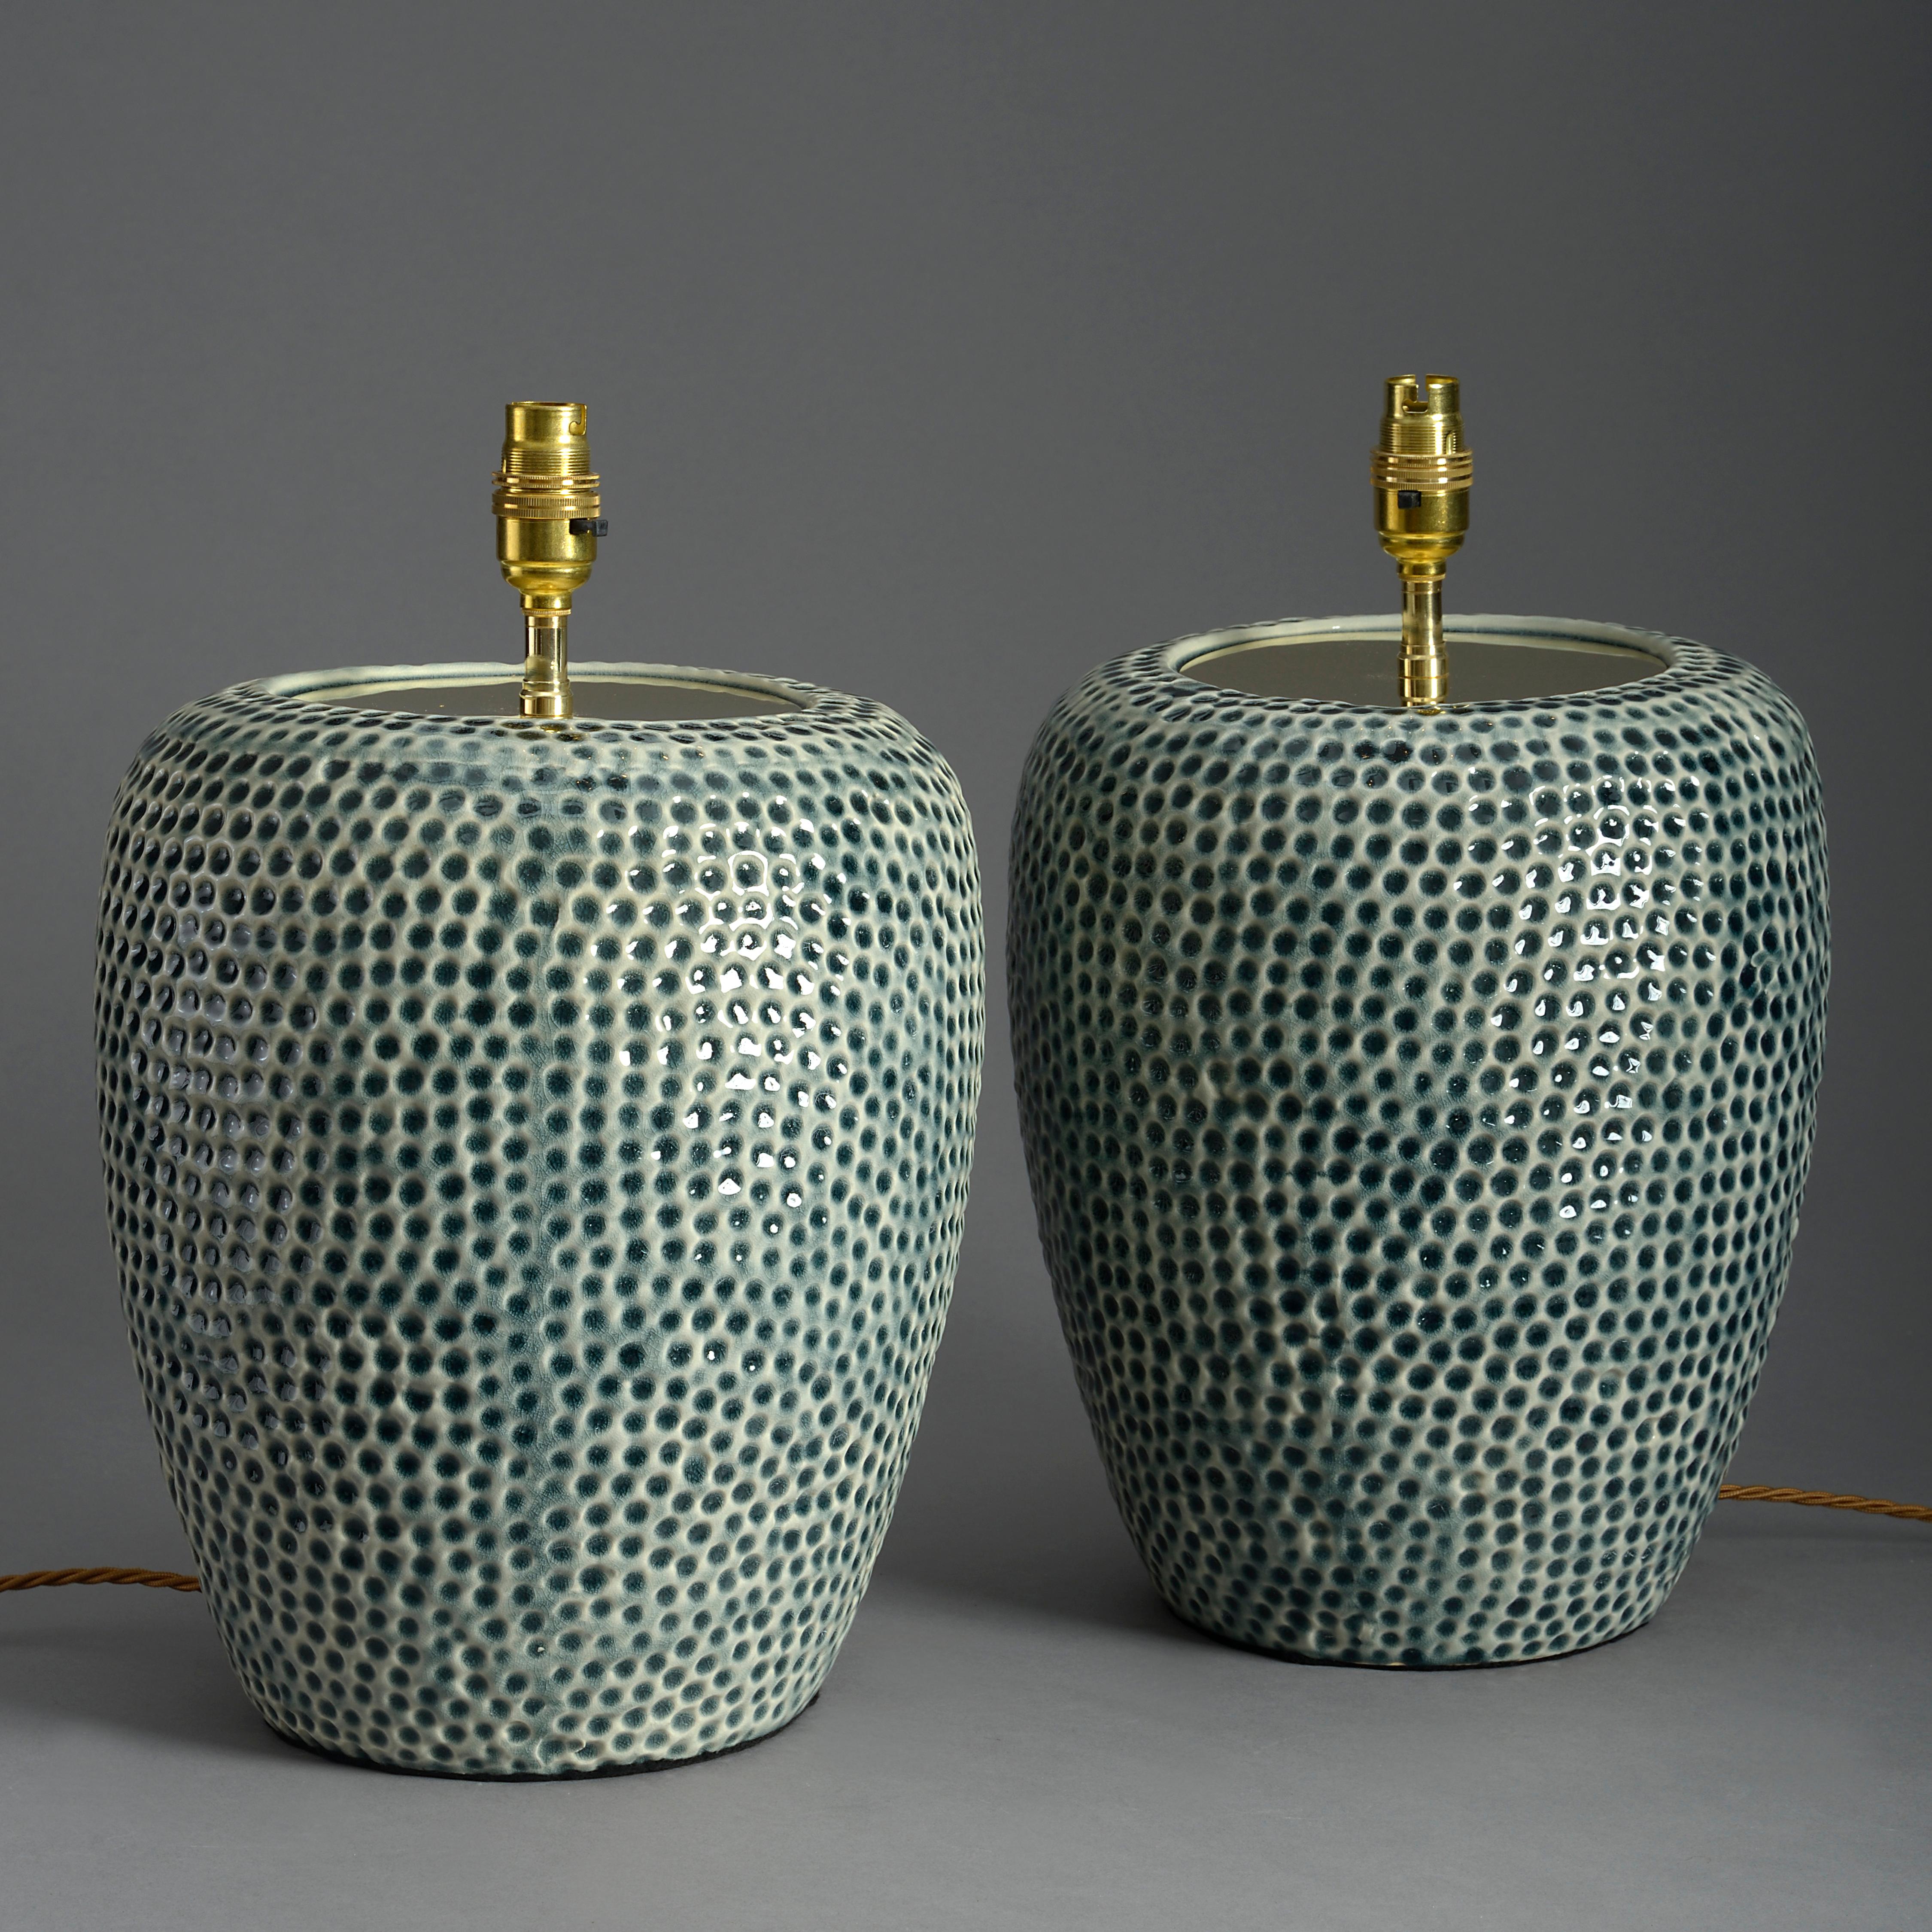 A pair of ceramic lamps, the dimpled jars with turquoise green glazed surfaces. 

Shades not included.